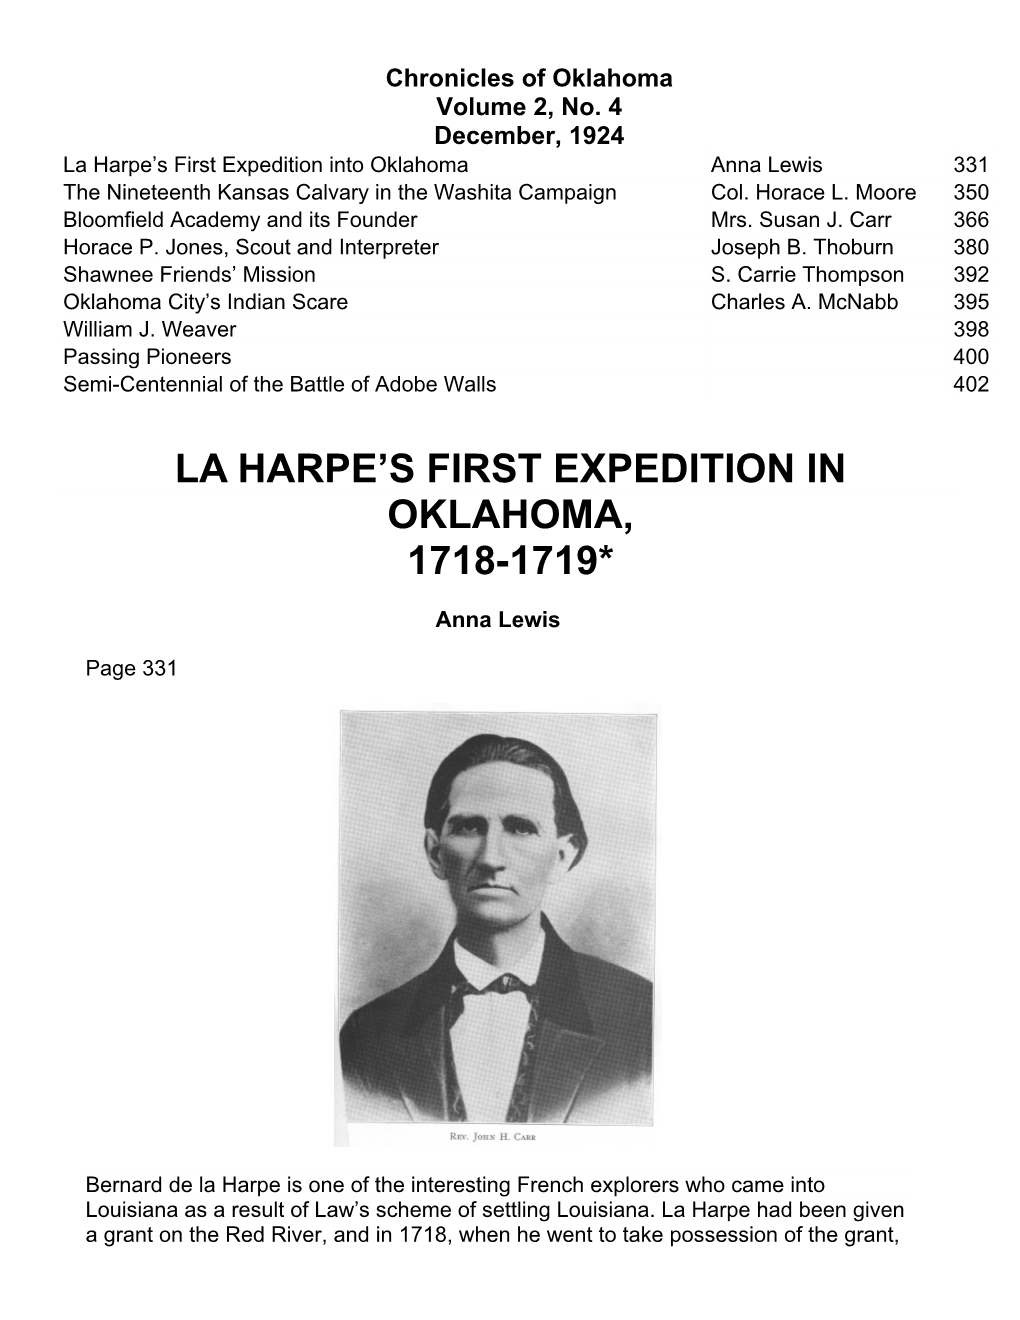 La Harpe's First Expedition in Oklahoma, 1718-1719*